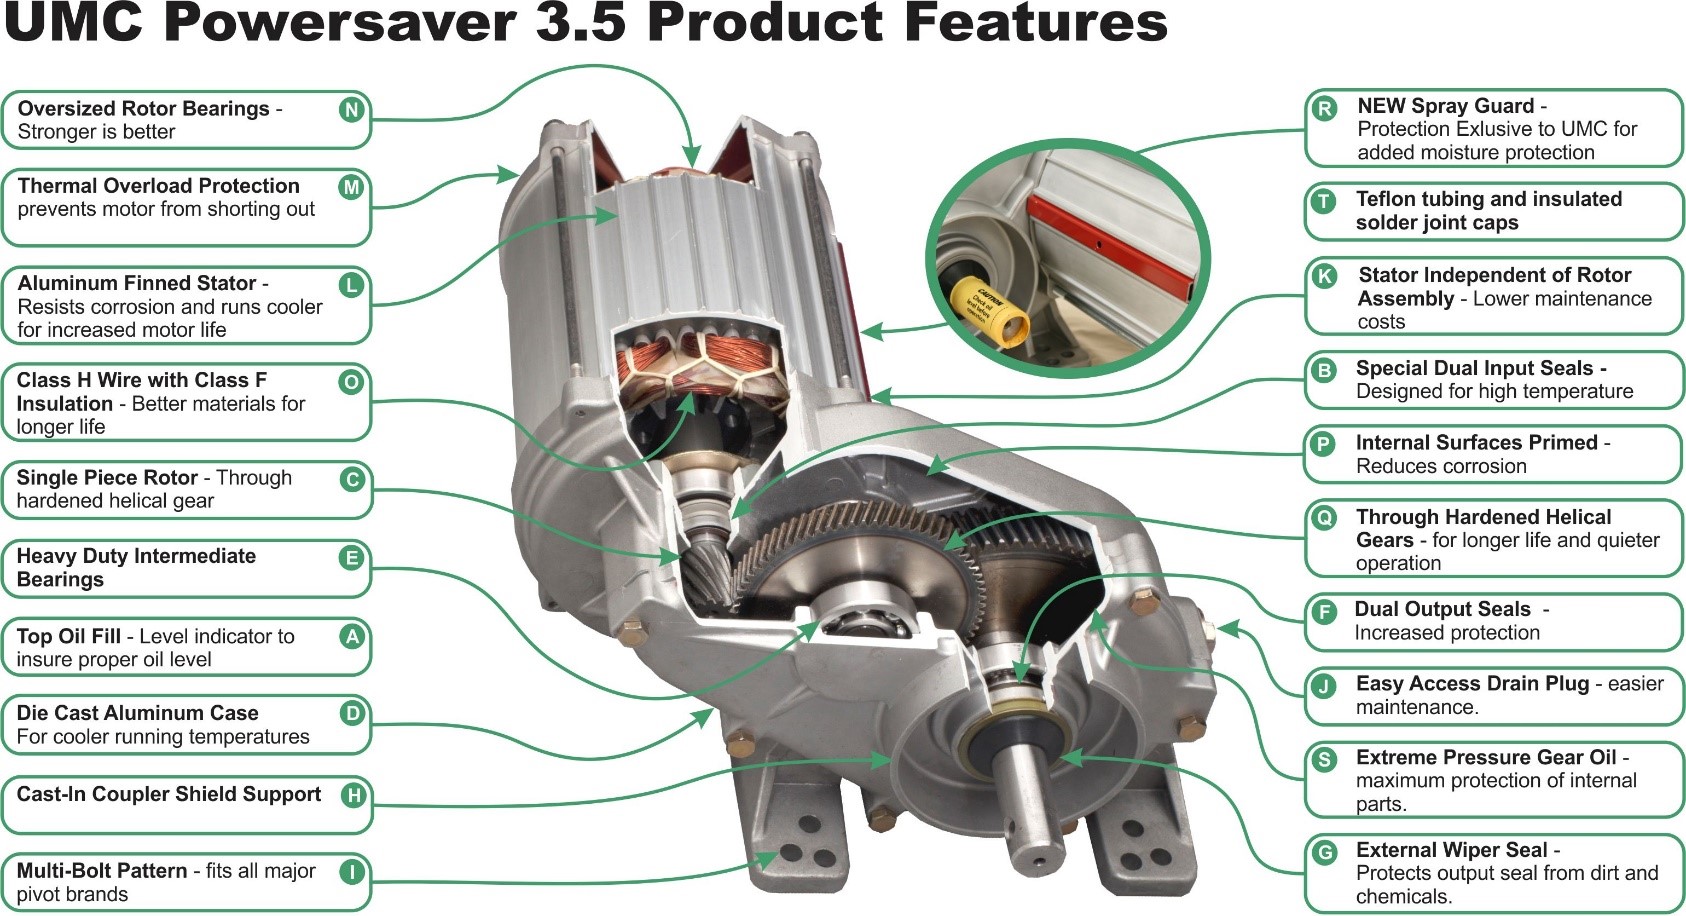 Power Saver™ Center Drive Features and Benefits